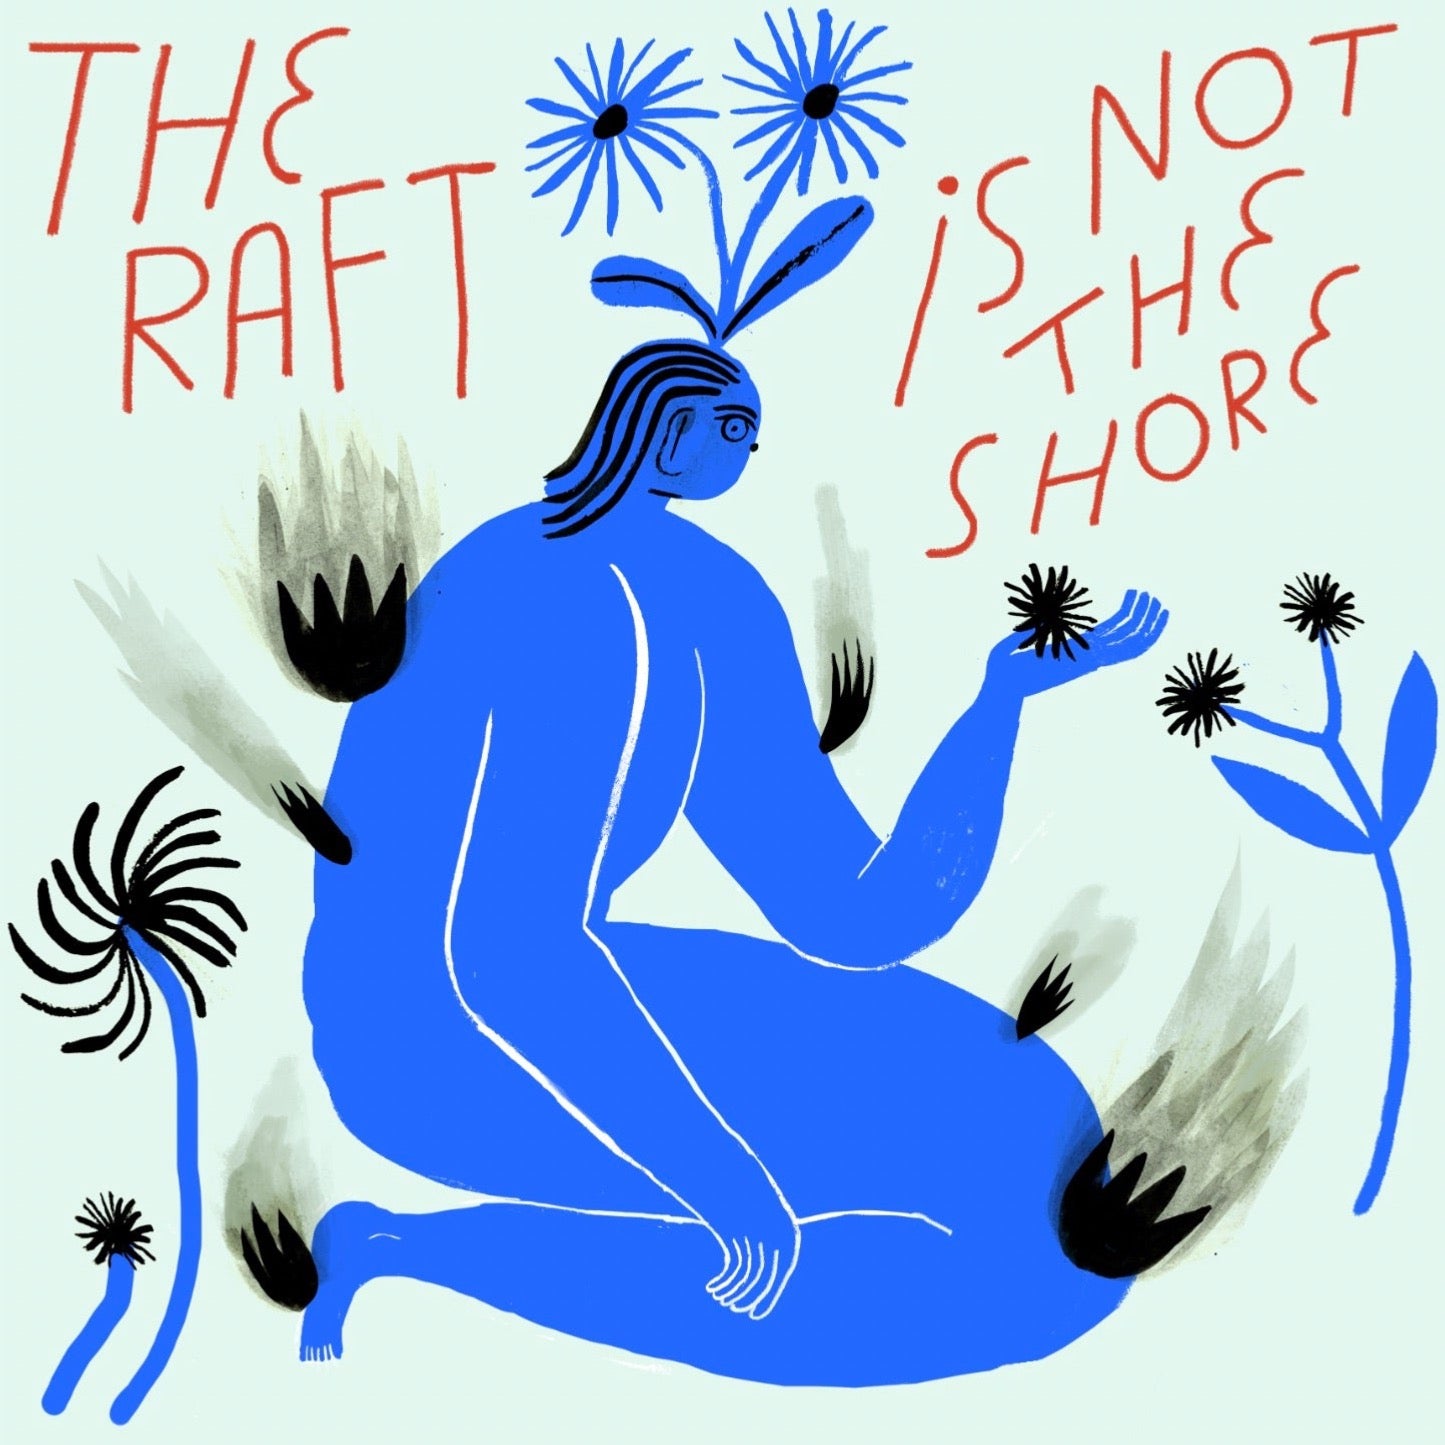 CD, Terrible Sons, The Raft Is Not The Shore